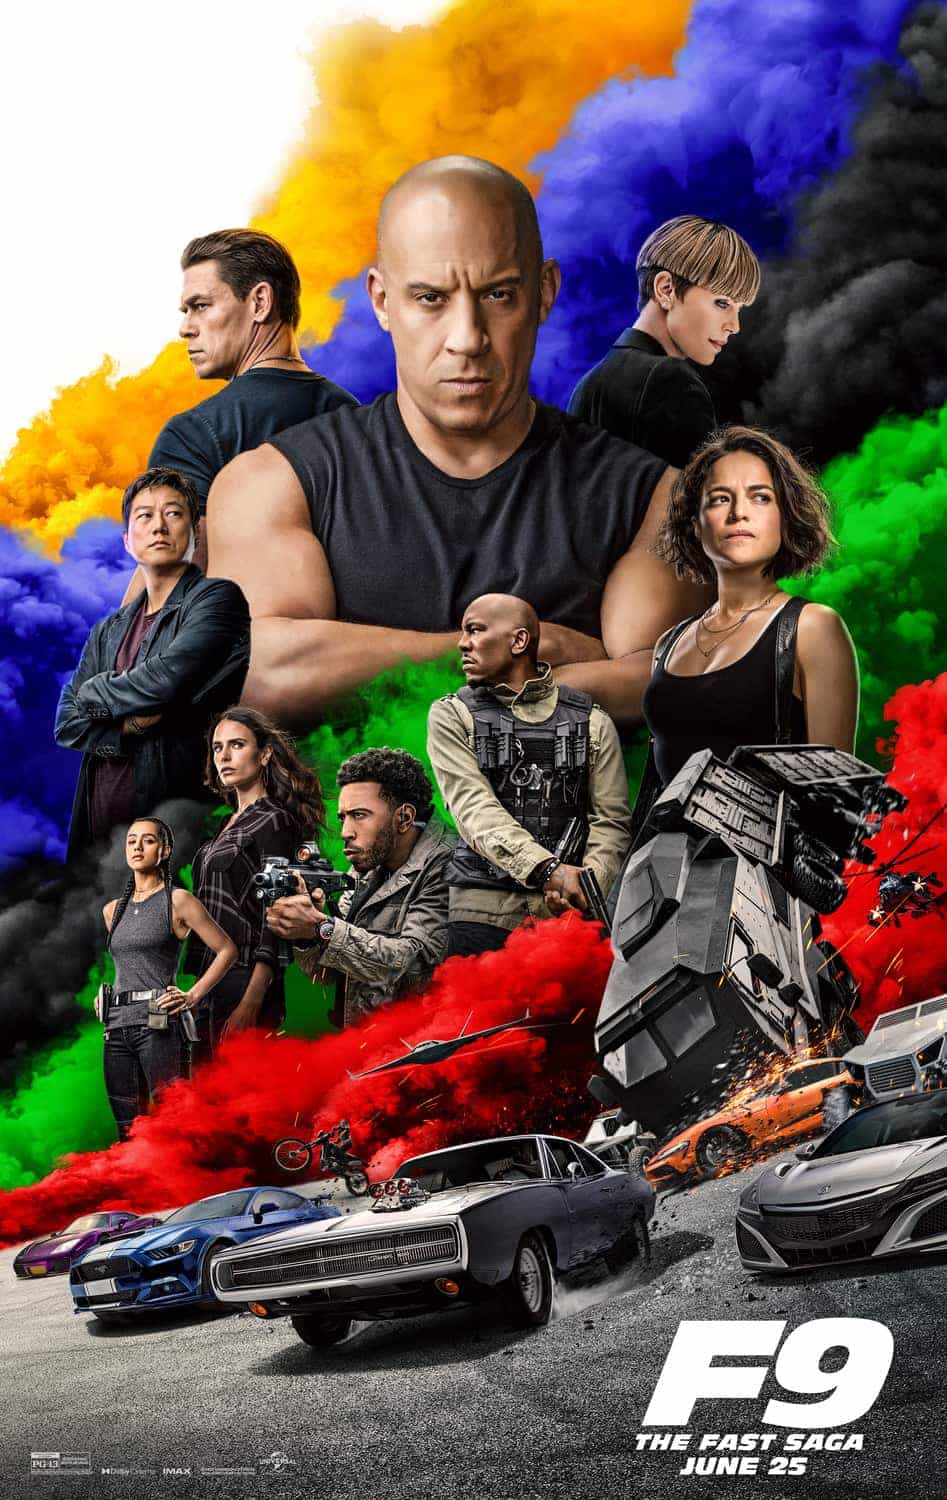 UK Box Office Weekend Report 2nd - 4th July 2021:  Fast 9 stays at the top of the UK box office Freaky the highest new film entering at 6